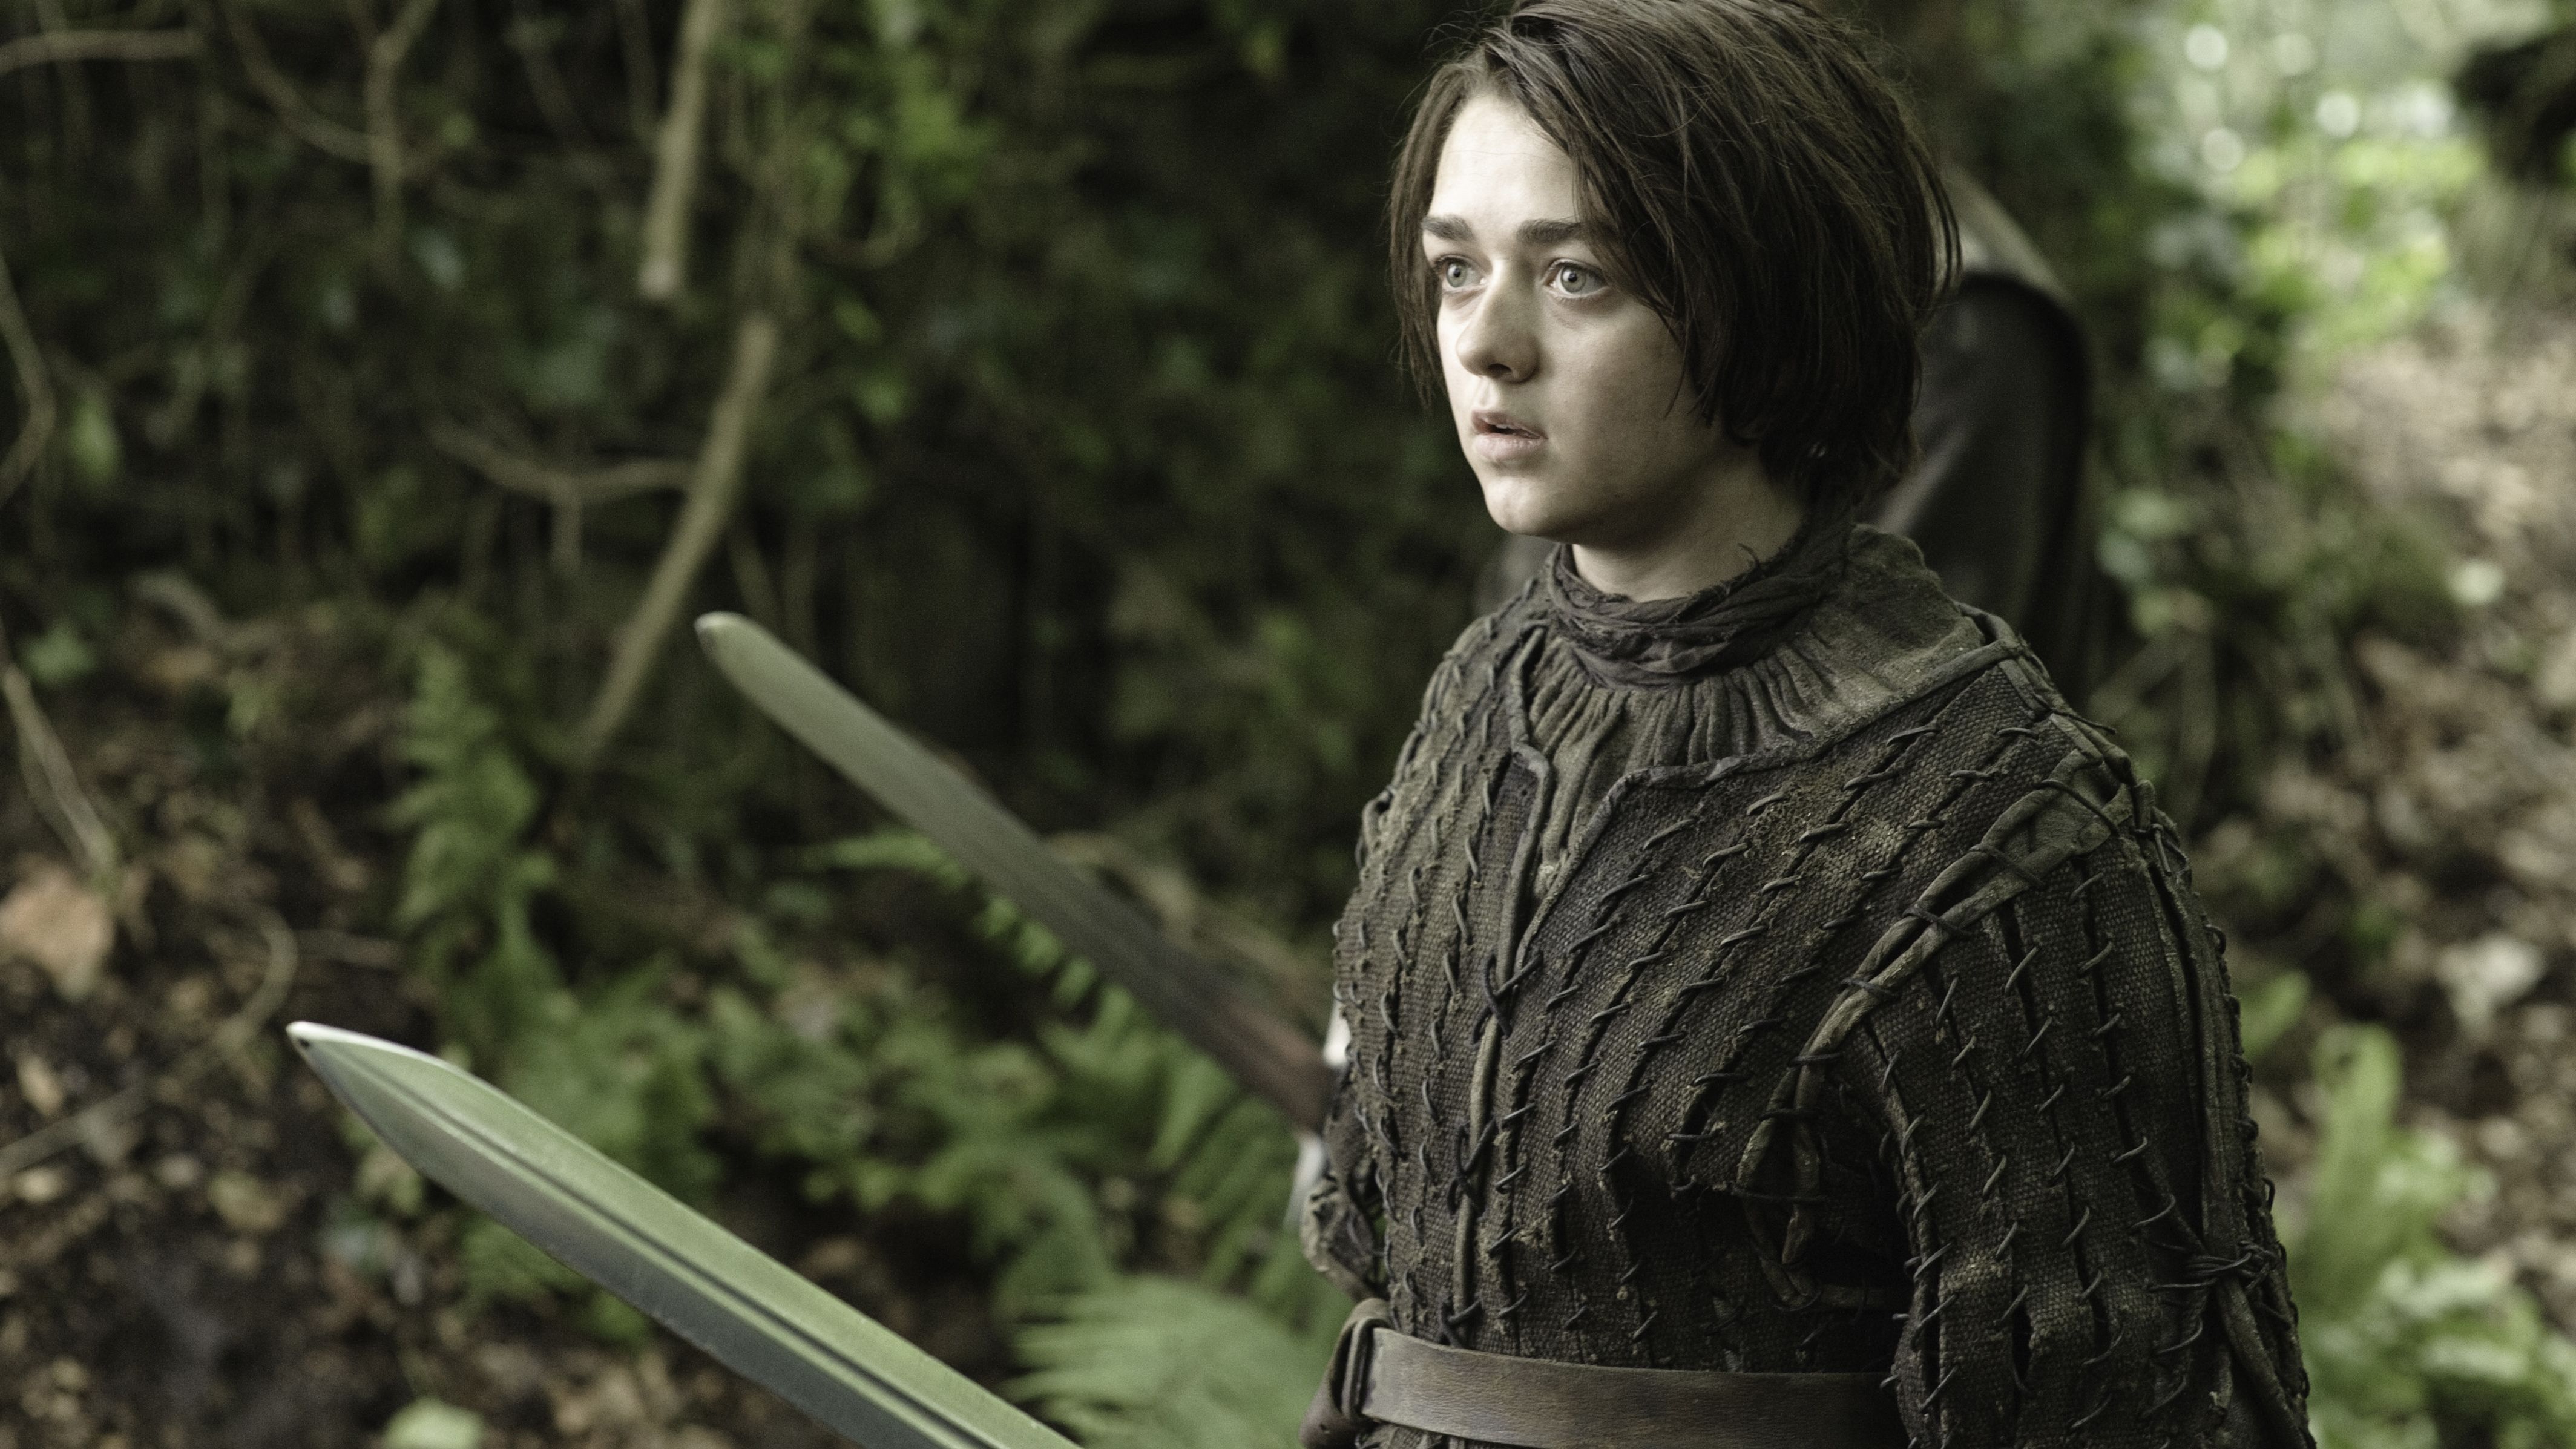 Actress Maisie Williams plays Arya on HBO's "Game of Thrones."